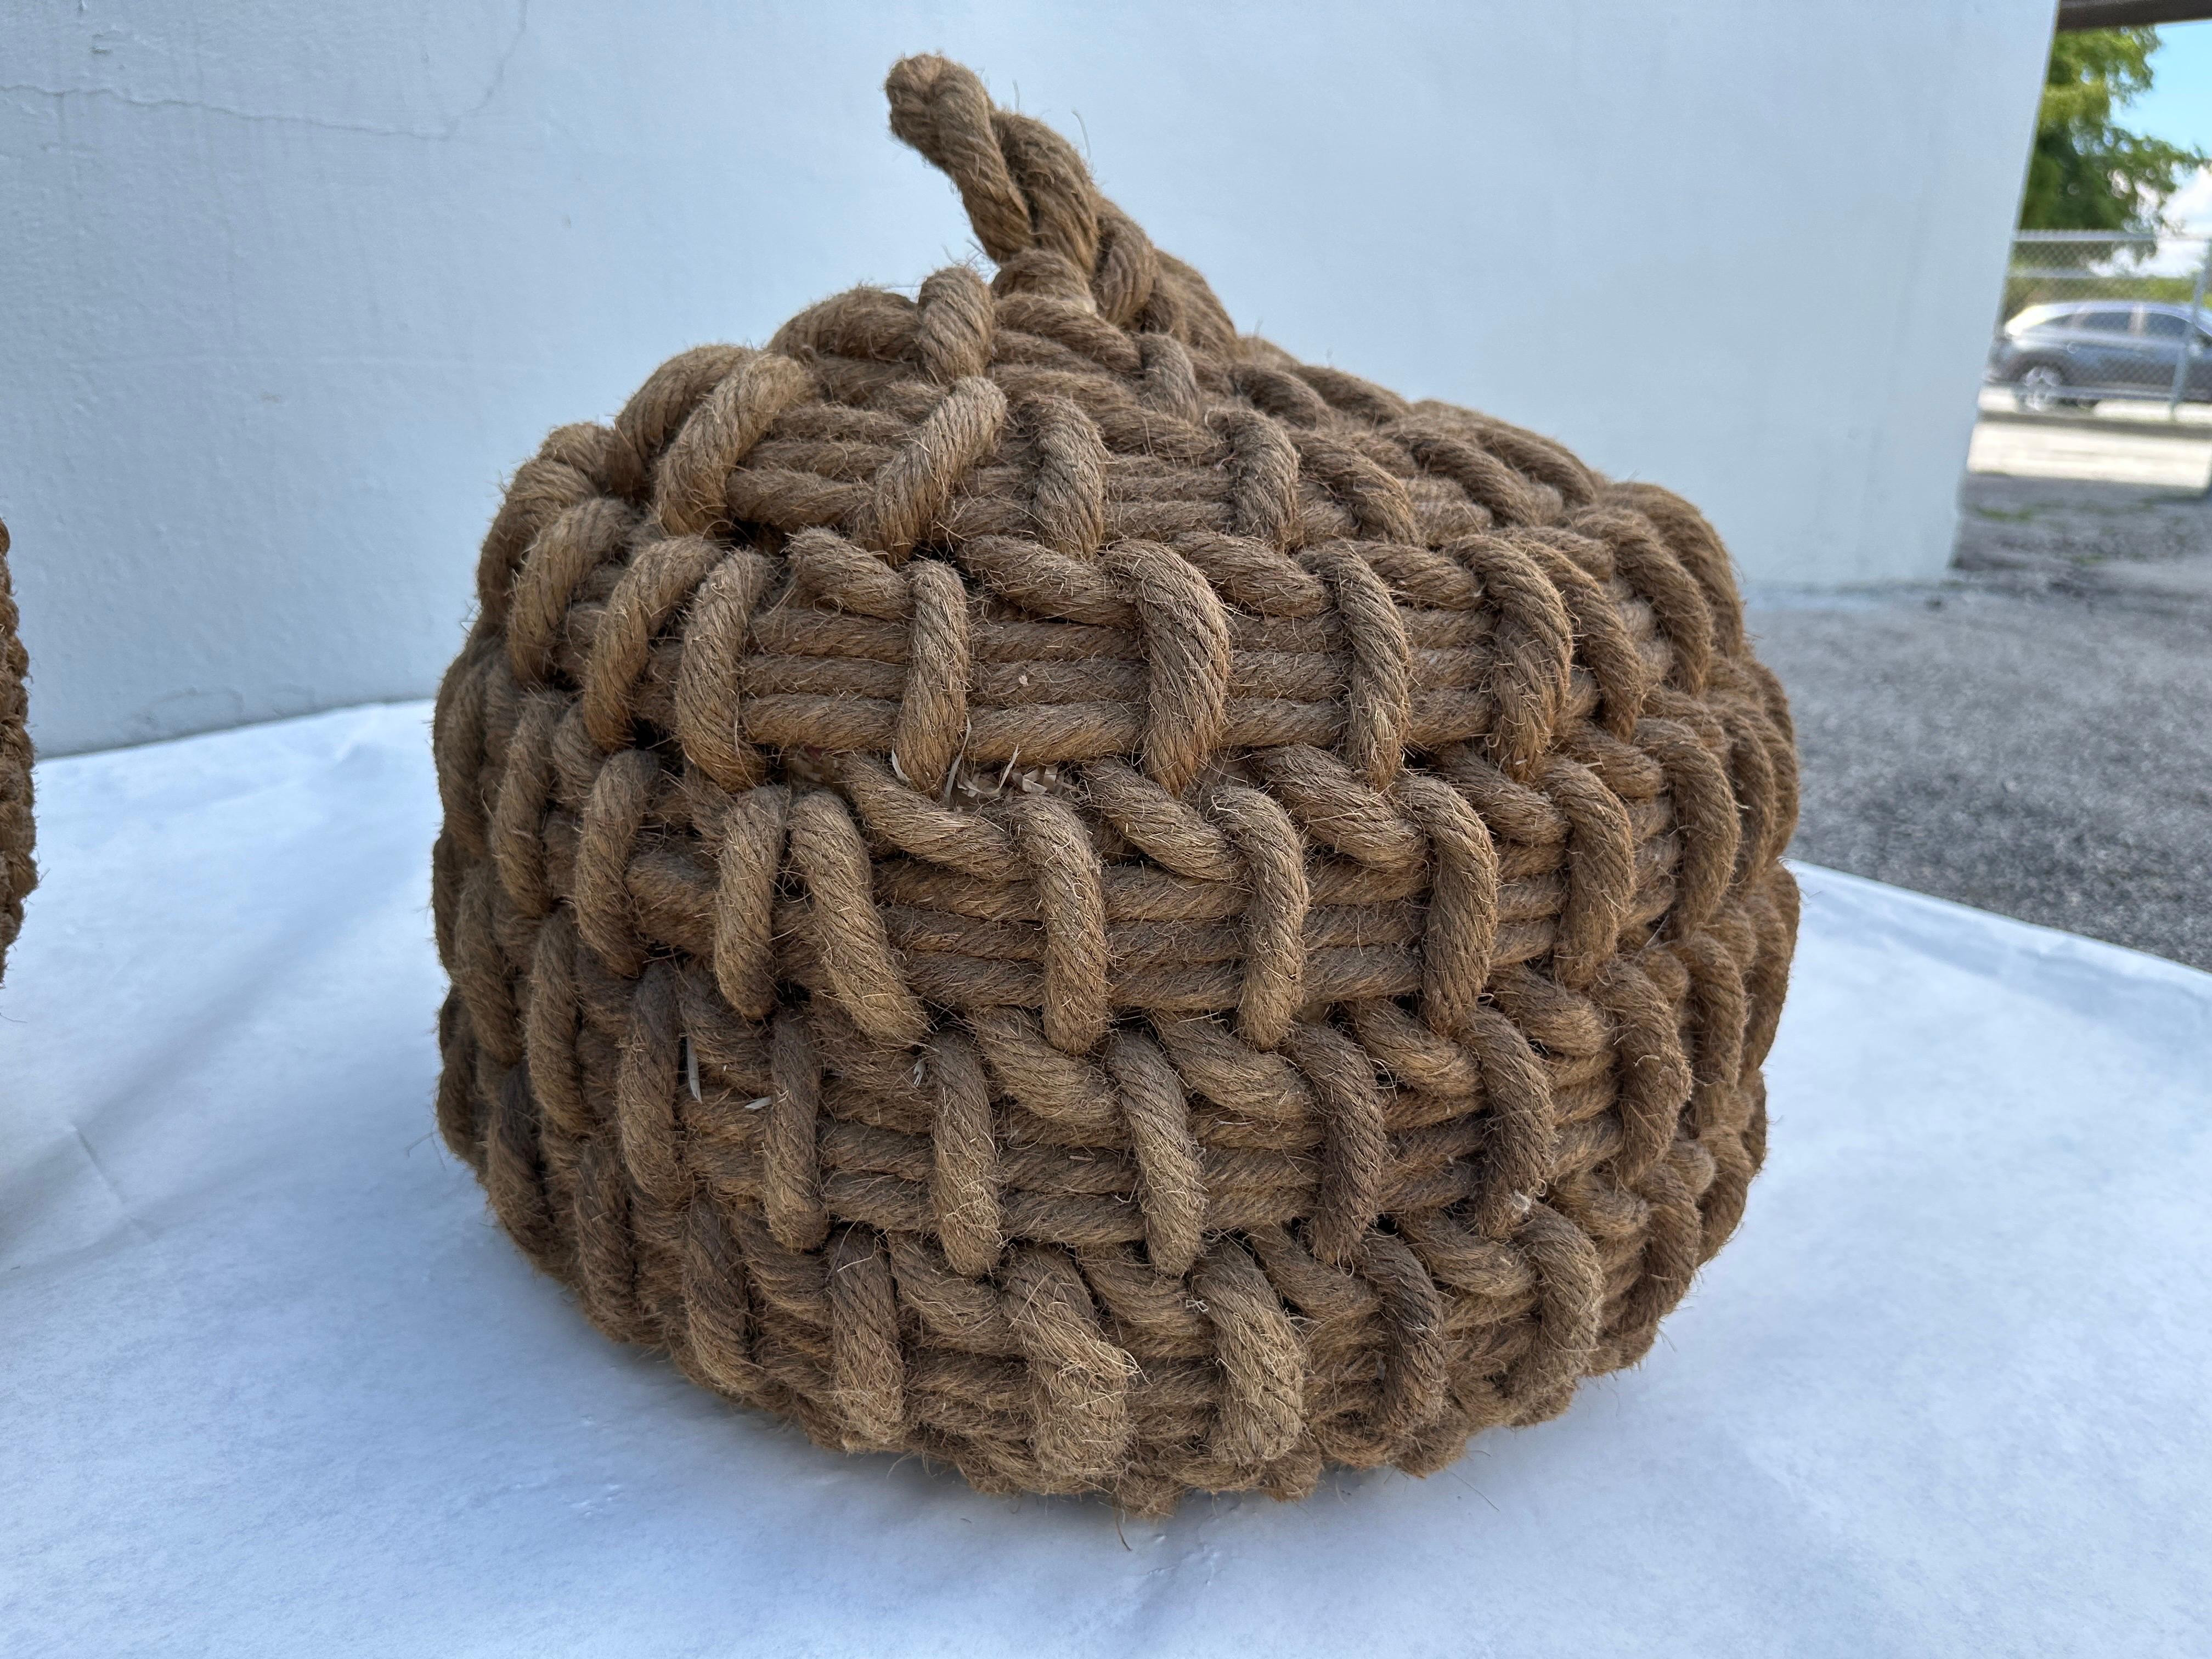 Amazingly decorative, these TWO hand-knotted rope boat fenders are PERFECT for a seaside, natural, relaxed home. They have SO many uses - can be doorstops, accents sculptures, etc. Smaller fender is 18 inches diameter and 16 inches tall.